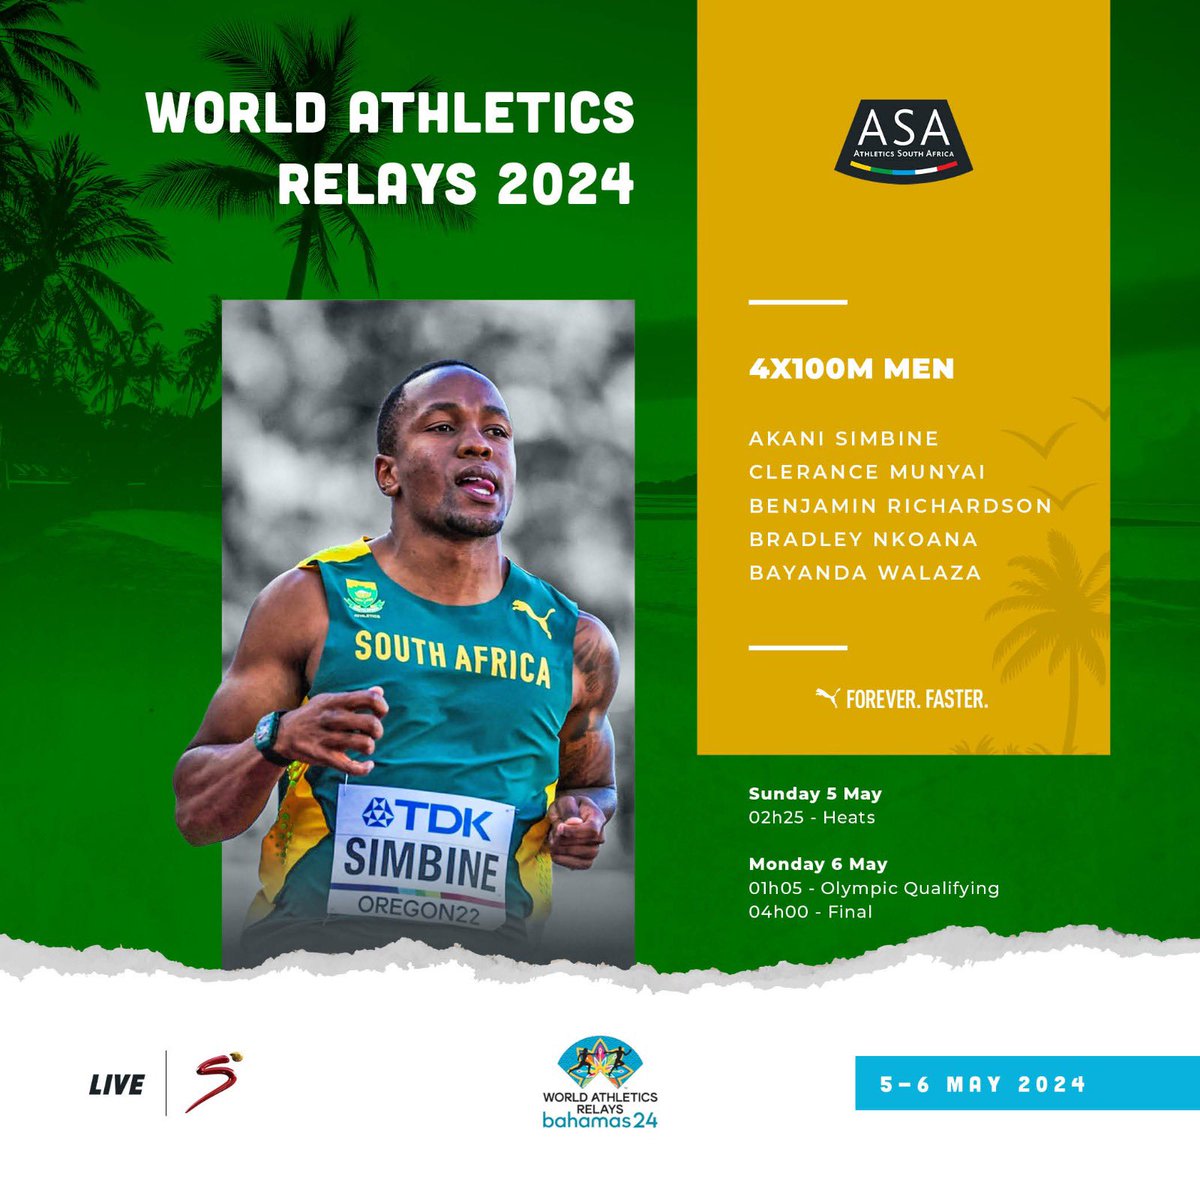 'The ultimate athletics game of tag' watch our favourite heroes take on the world stage 🔥🇿🇦 #Worldrelays #RoadToOlympics #TeamSA